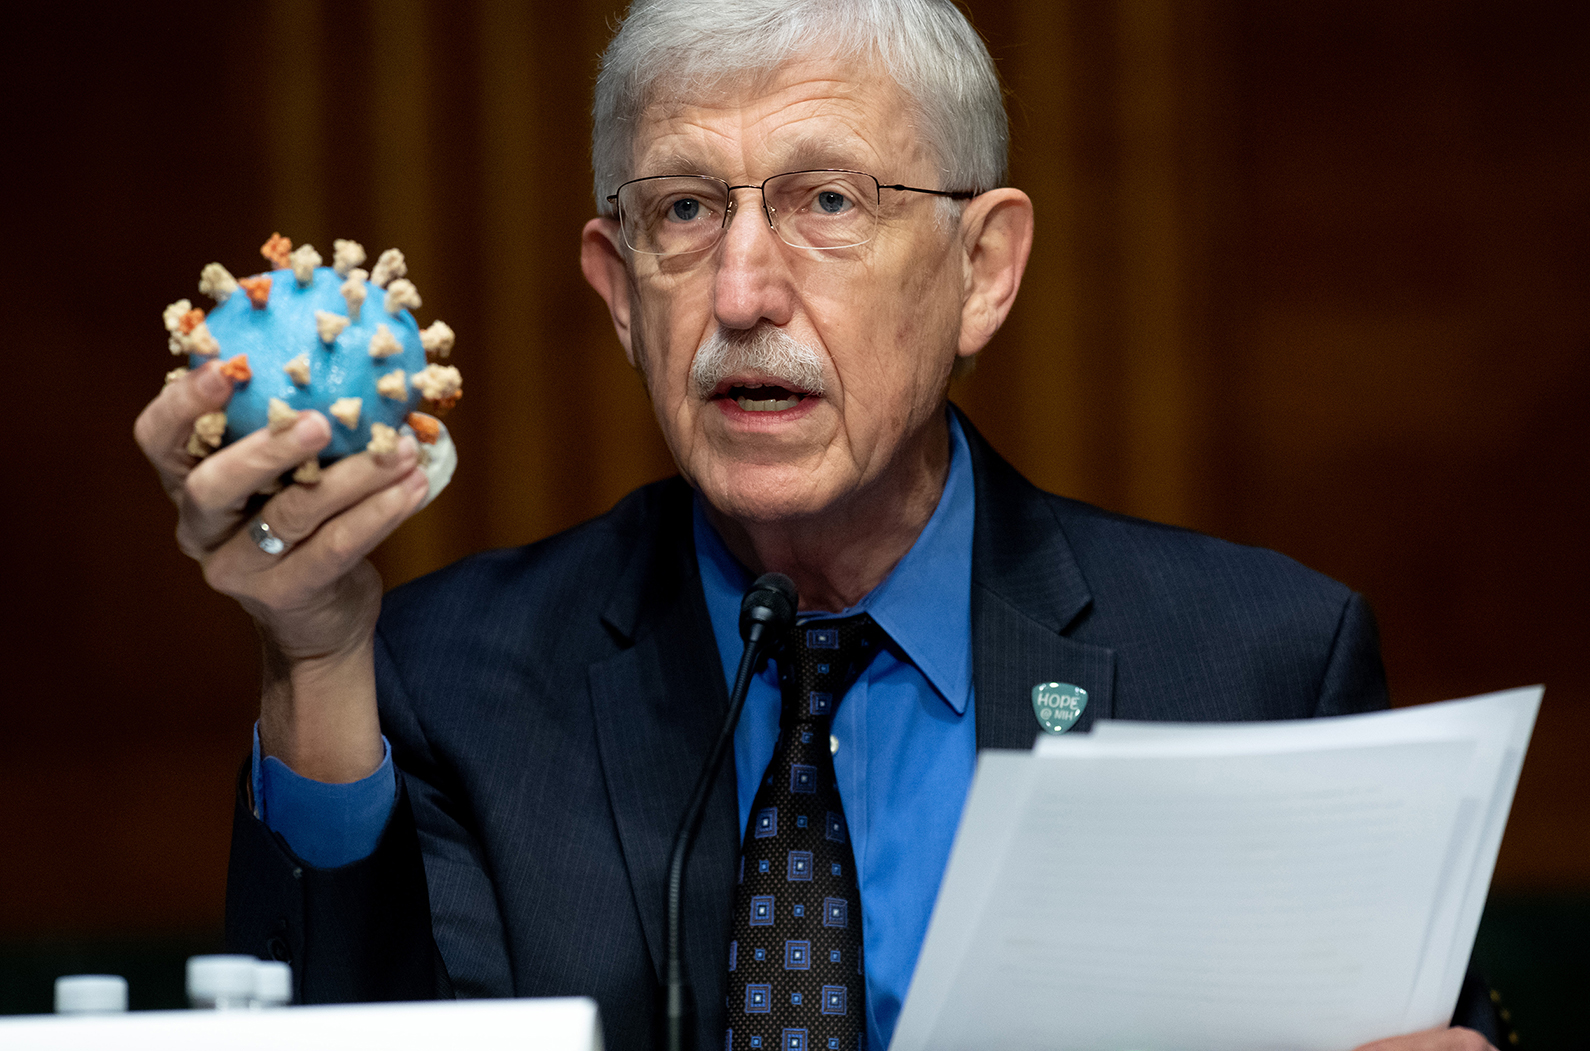 Dr. Francis Collins, Director of the National Institutes of Health (NIH), holds up a model of COVID-19, known as coronavirus, during a US Senate Appropriations subcommittee hearing on the plan to research, manufacture and distribute a coronavirus vaccine, known as Operation Warp Speed, July 2, 2020 on Capitol Hill in Washington, DC. 